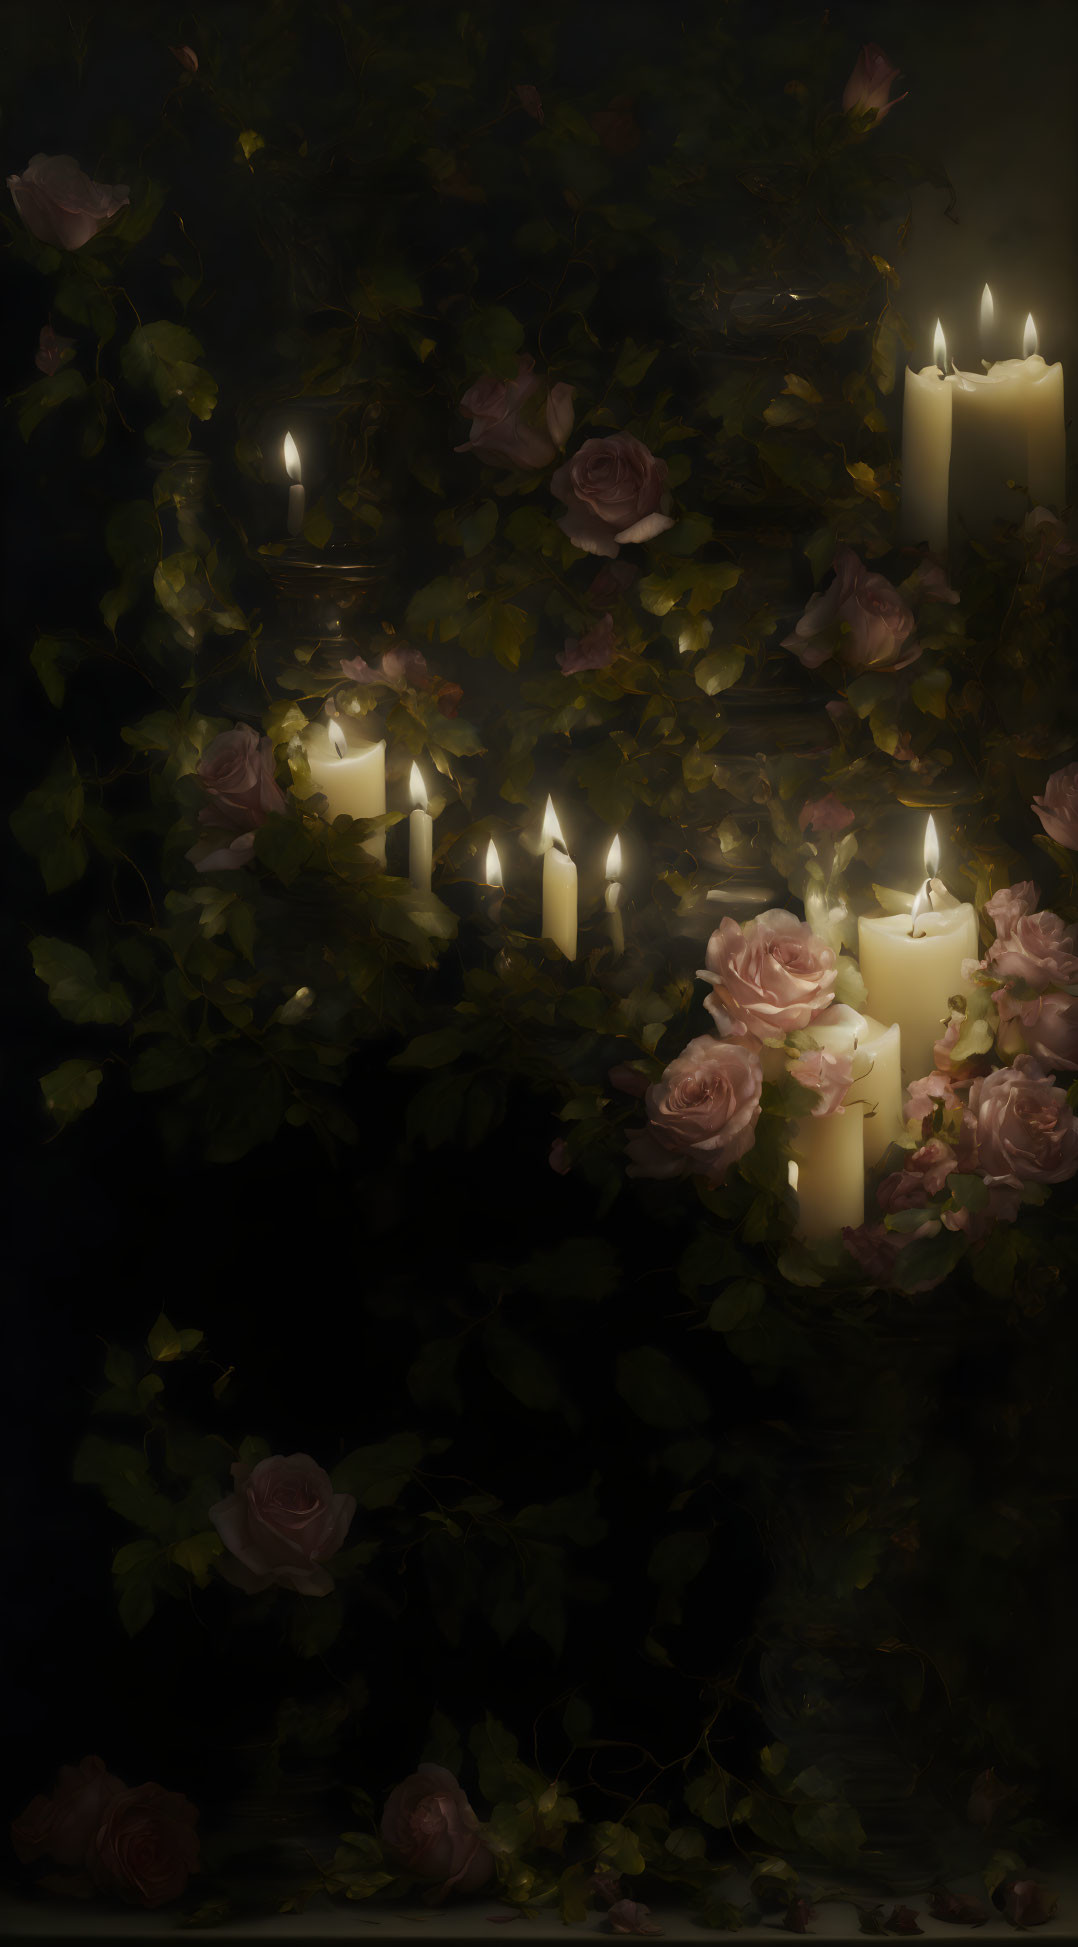 Dimly Lit Scene with Candles, Green Foliage, and Pink Roses